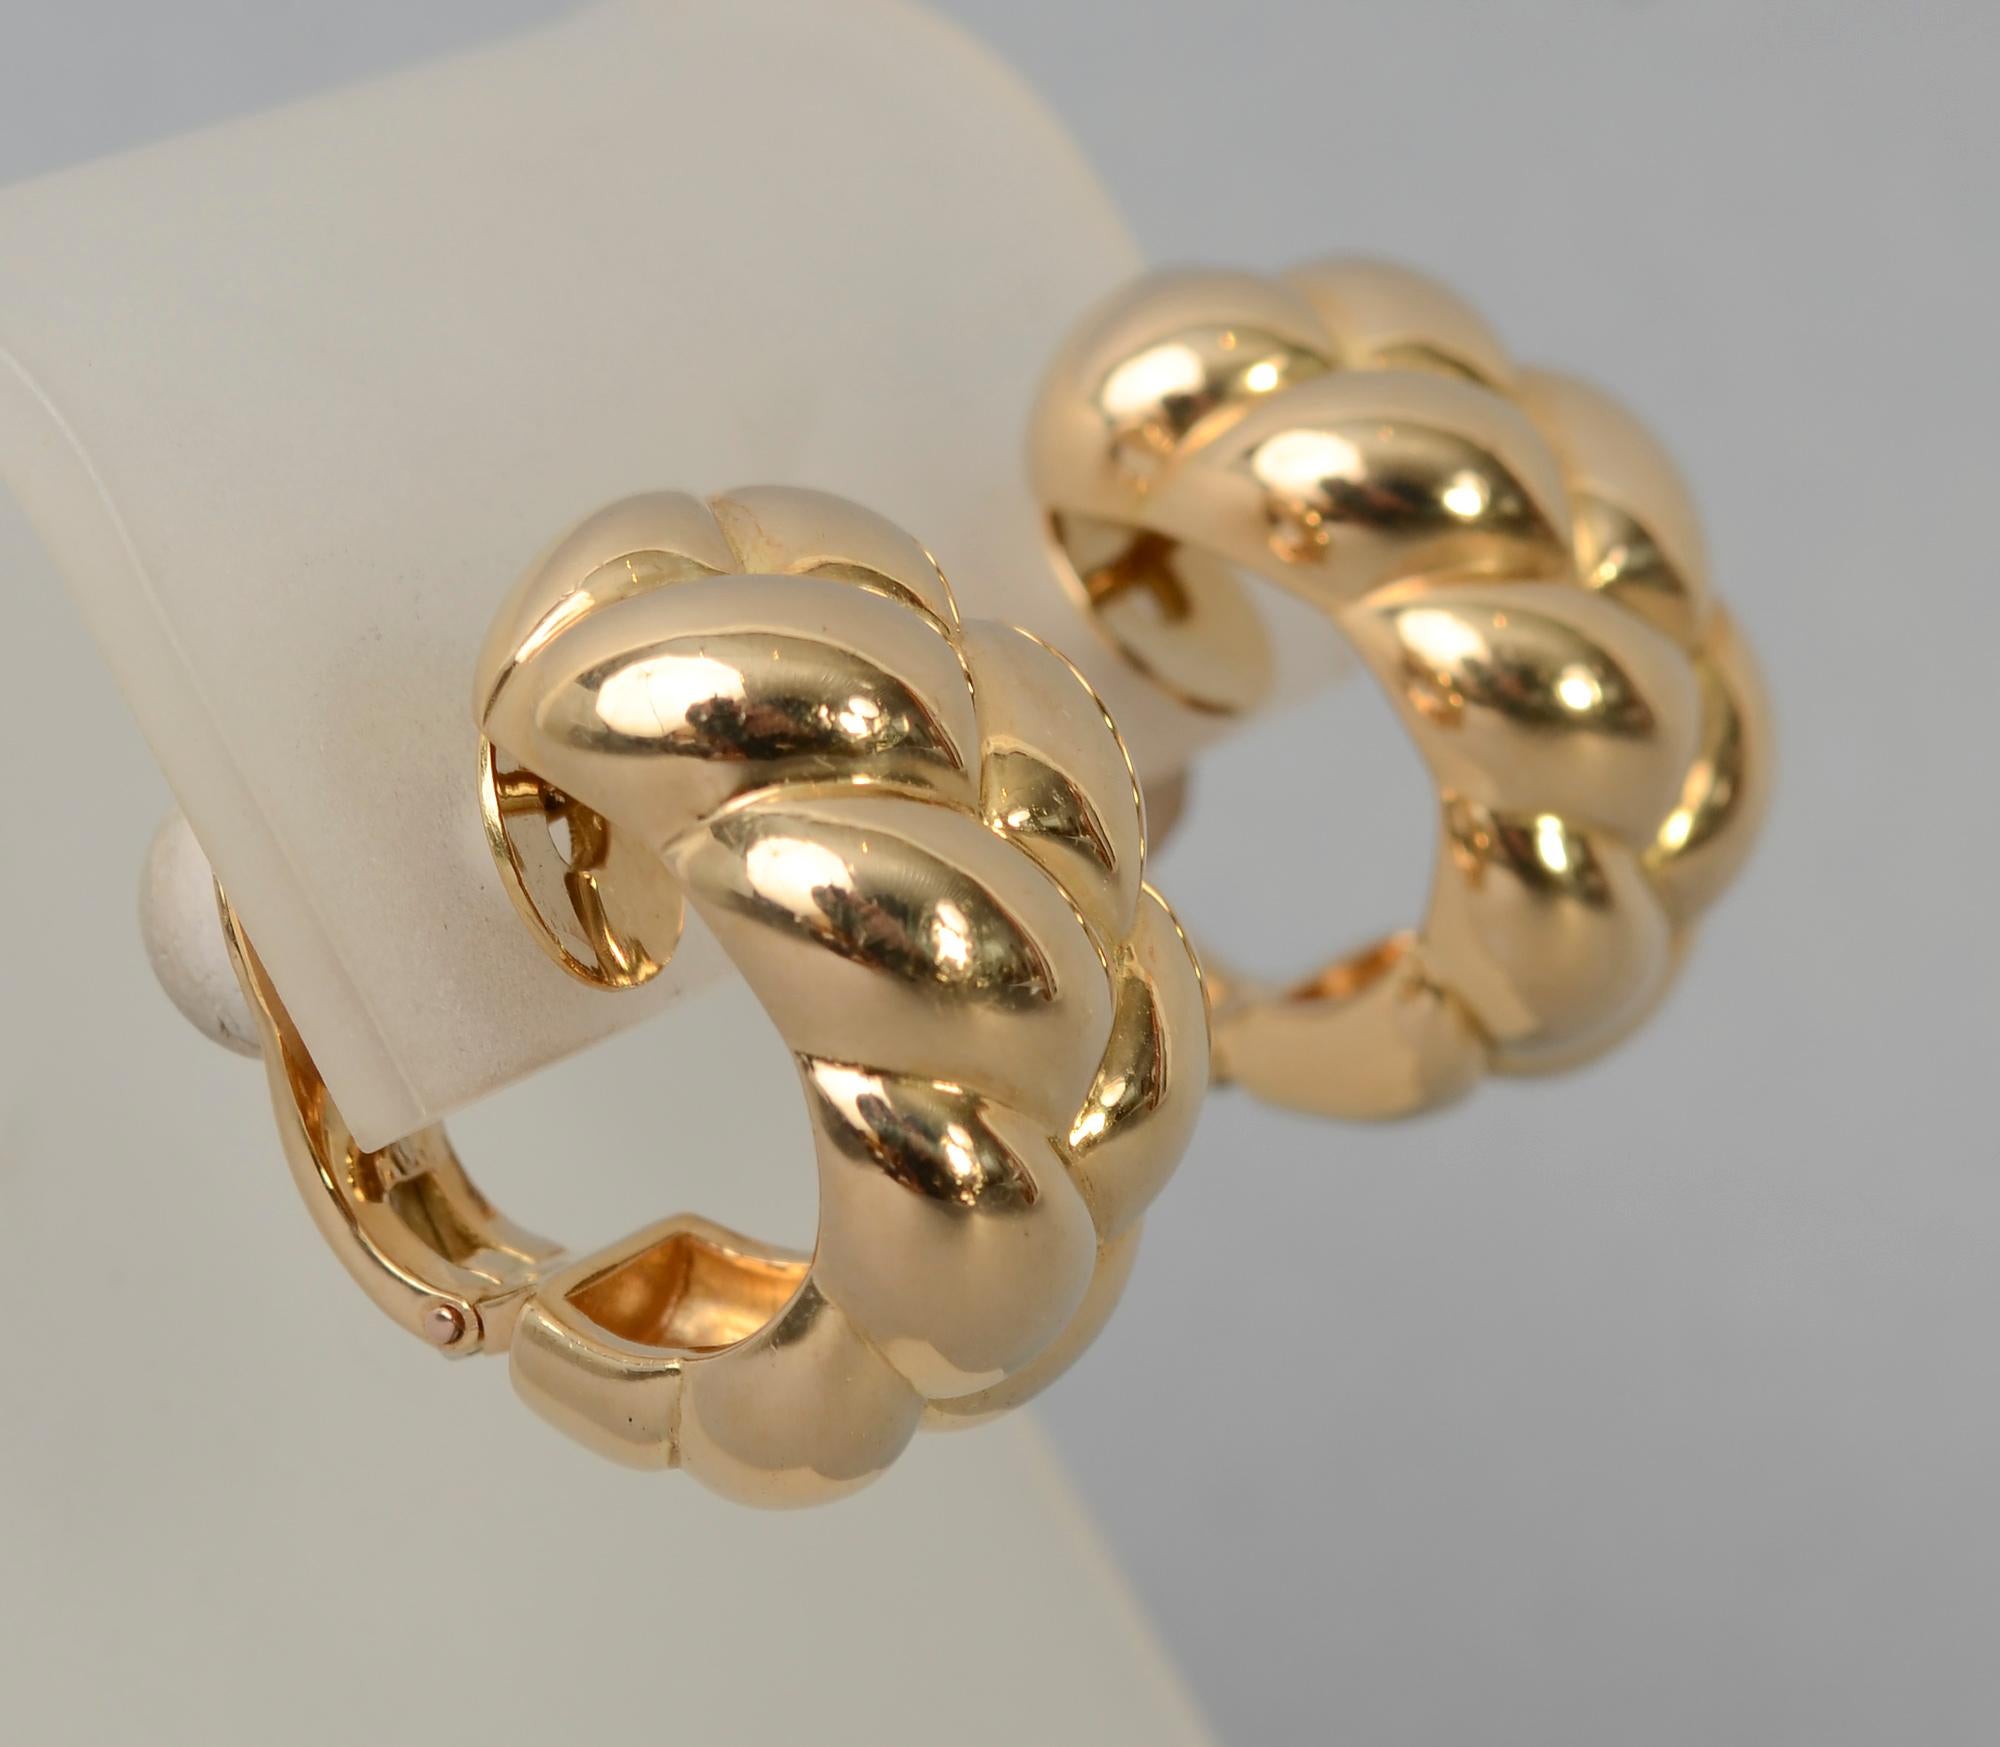 Van Cleef and Arpels 18 karat gold hoop earrings made to look braided. The backs are posts and clips with original rubber pads for comfort.
The earrings are 5/8